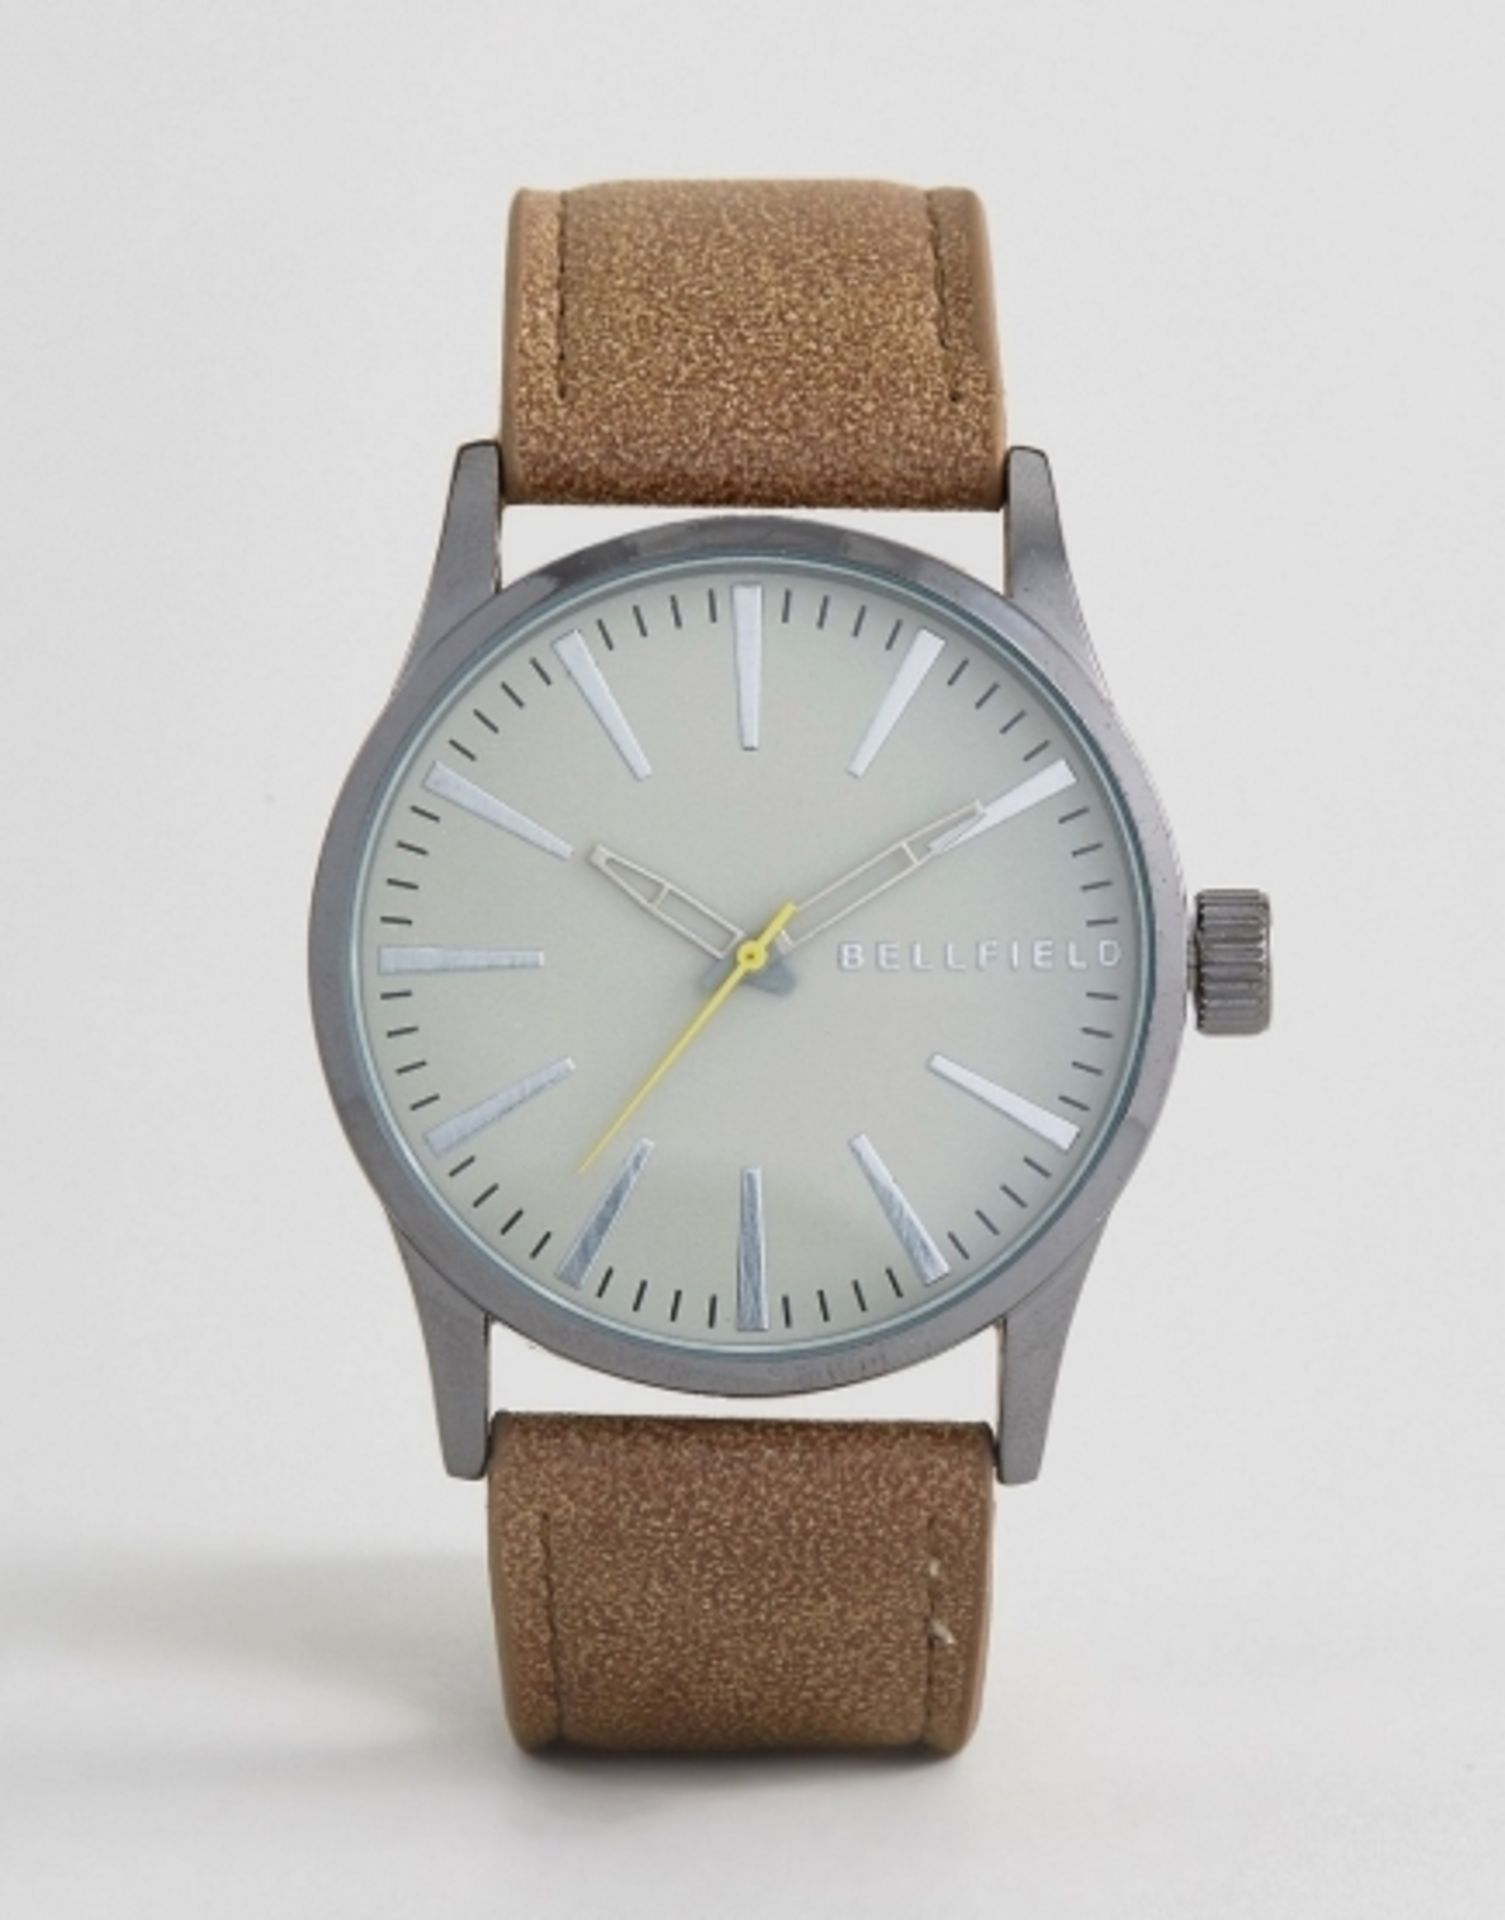 V *TRADE QTY* Brand New Bellfield Gents Watch With Cream Face And Brown Leather Strap RRP £50.00 X 3